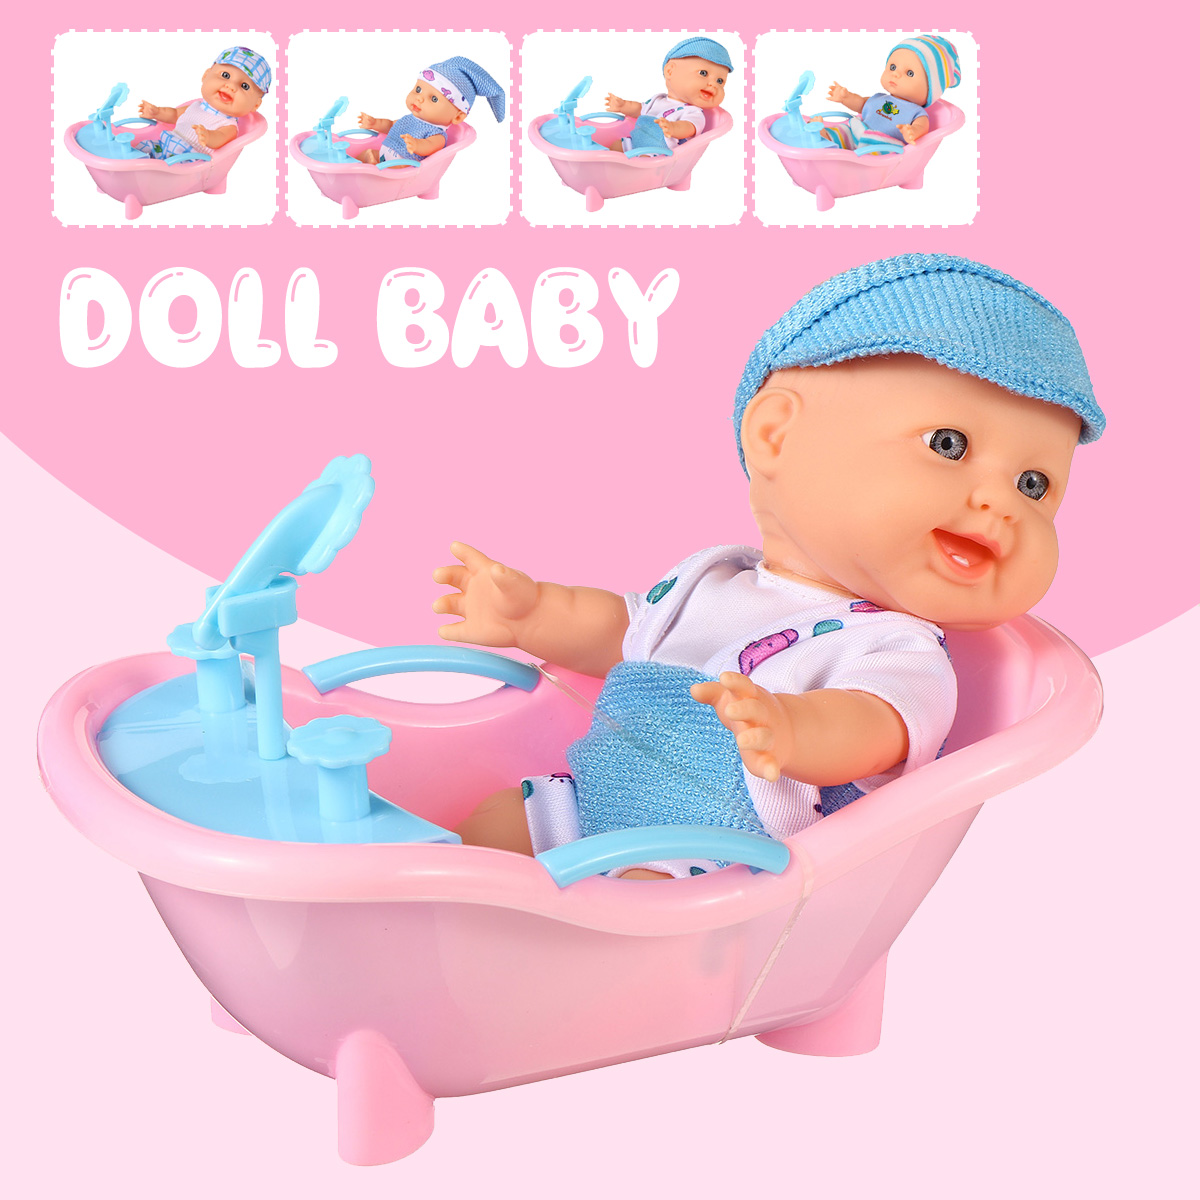 Simulation-Baby-3D-Creative-Cute-Doll-Play-House-Toy-Doll-Vinyl-Doll-Gift-1818656-1